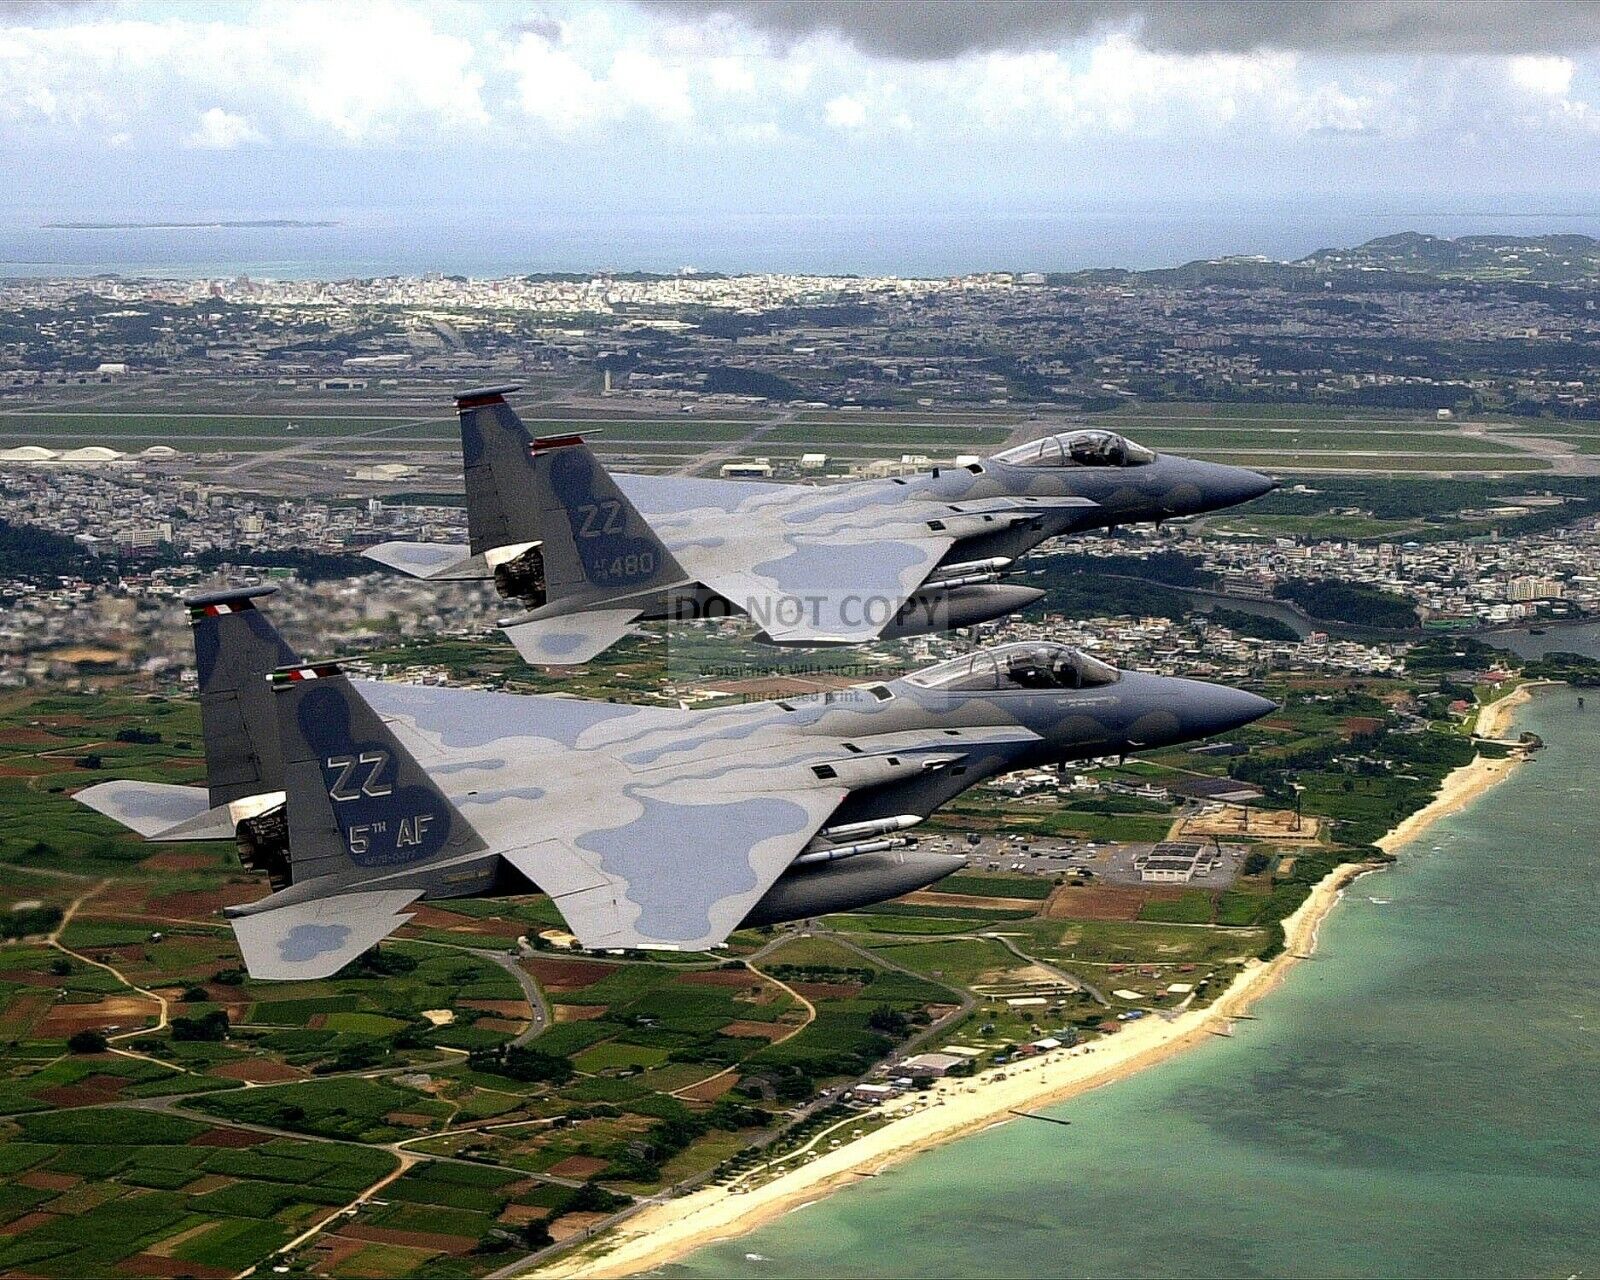 USAF F-15C EAGLES FLY IN FORMATION OVER KADENA AIR BASE - 8X10 PHOTO (EP-110)